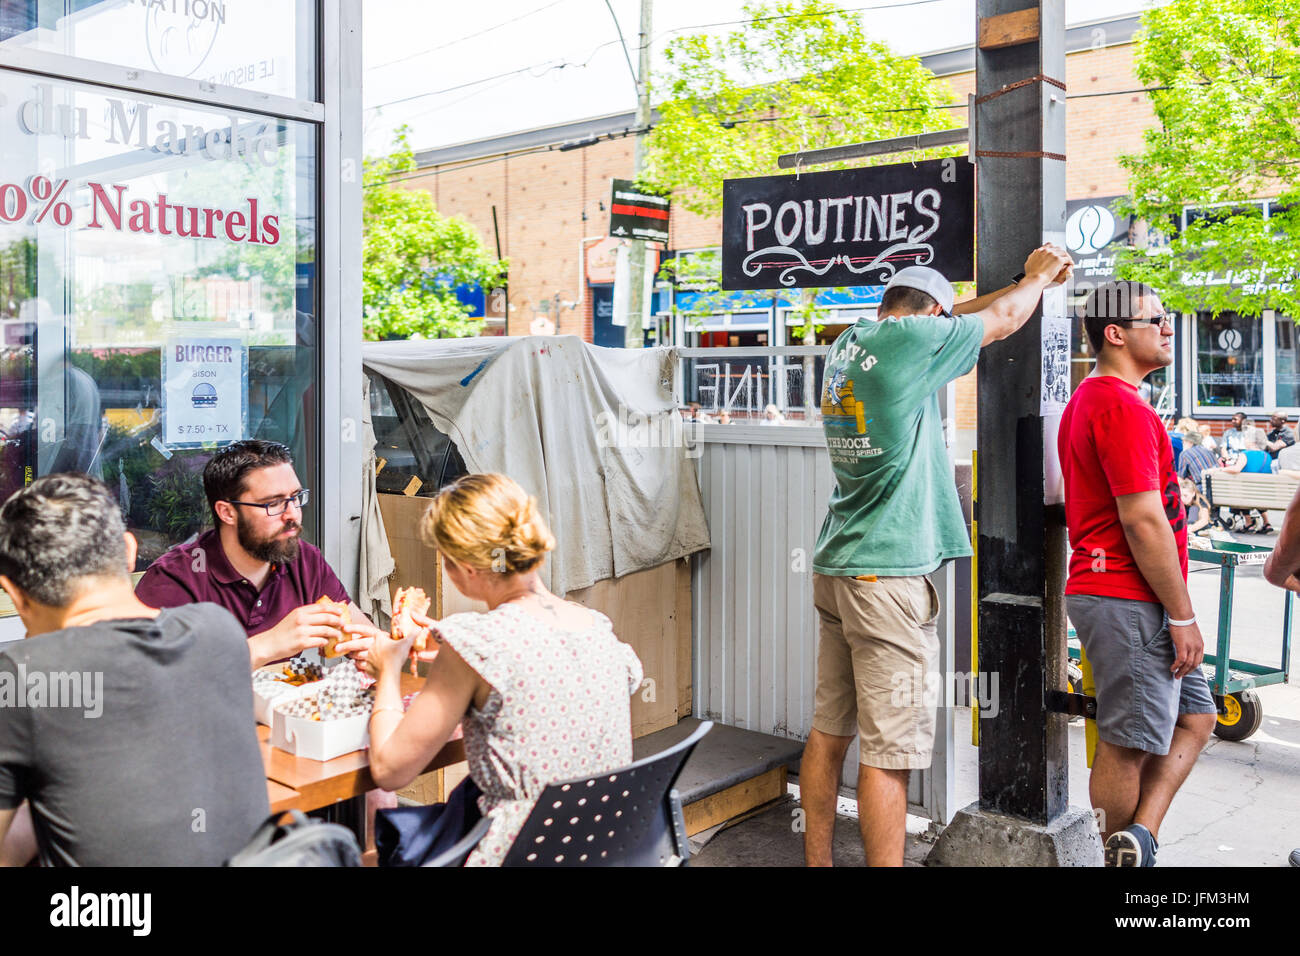 Montreal, Canada - May 28, 2017: Jean Talon market Poutine restaurant sign inside building with people eating at tables in city in Quebec region Stock Photo